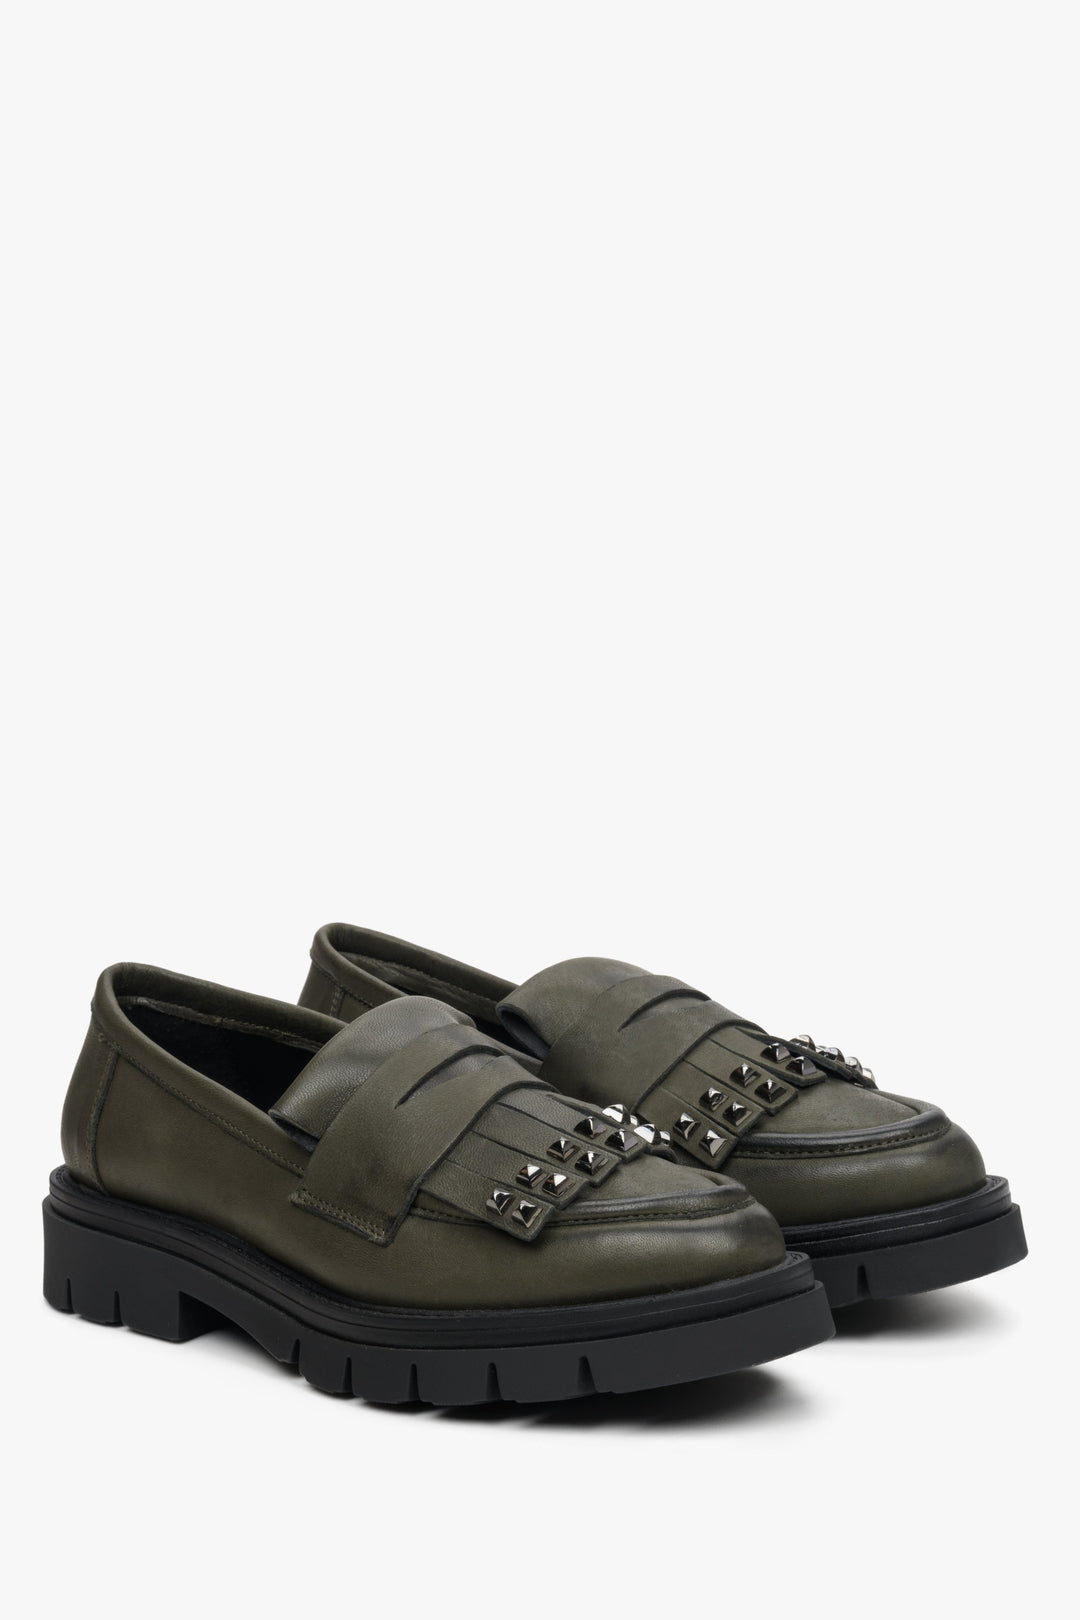 Women's dark green loafers made of Italian genuine  leather by Estro.